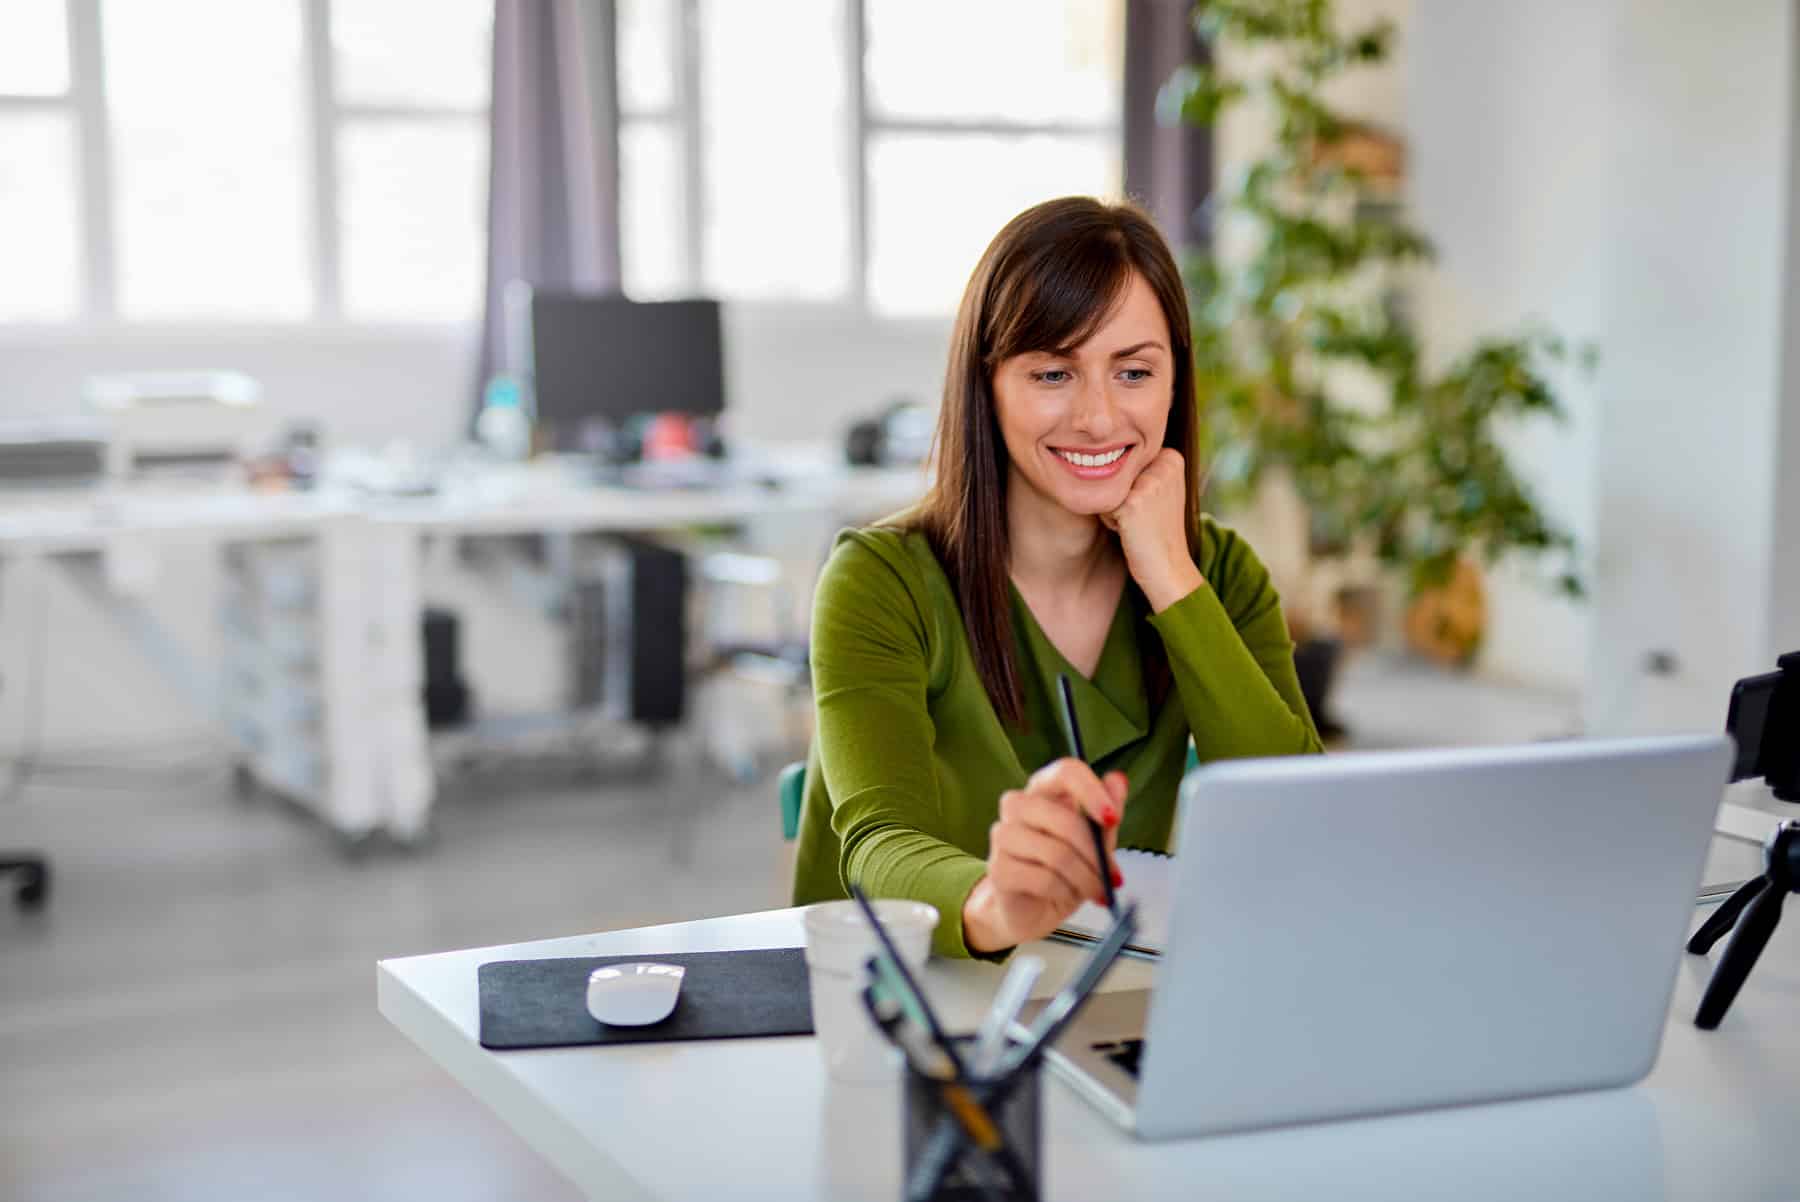 Woman holding pencil an looking at laptop while sitting in office.